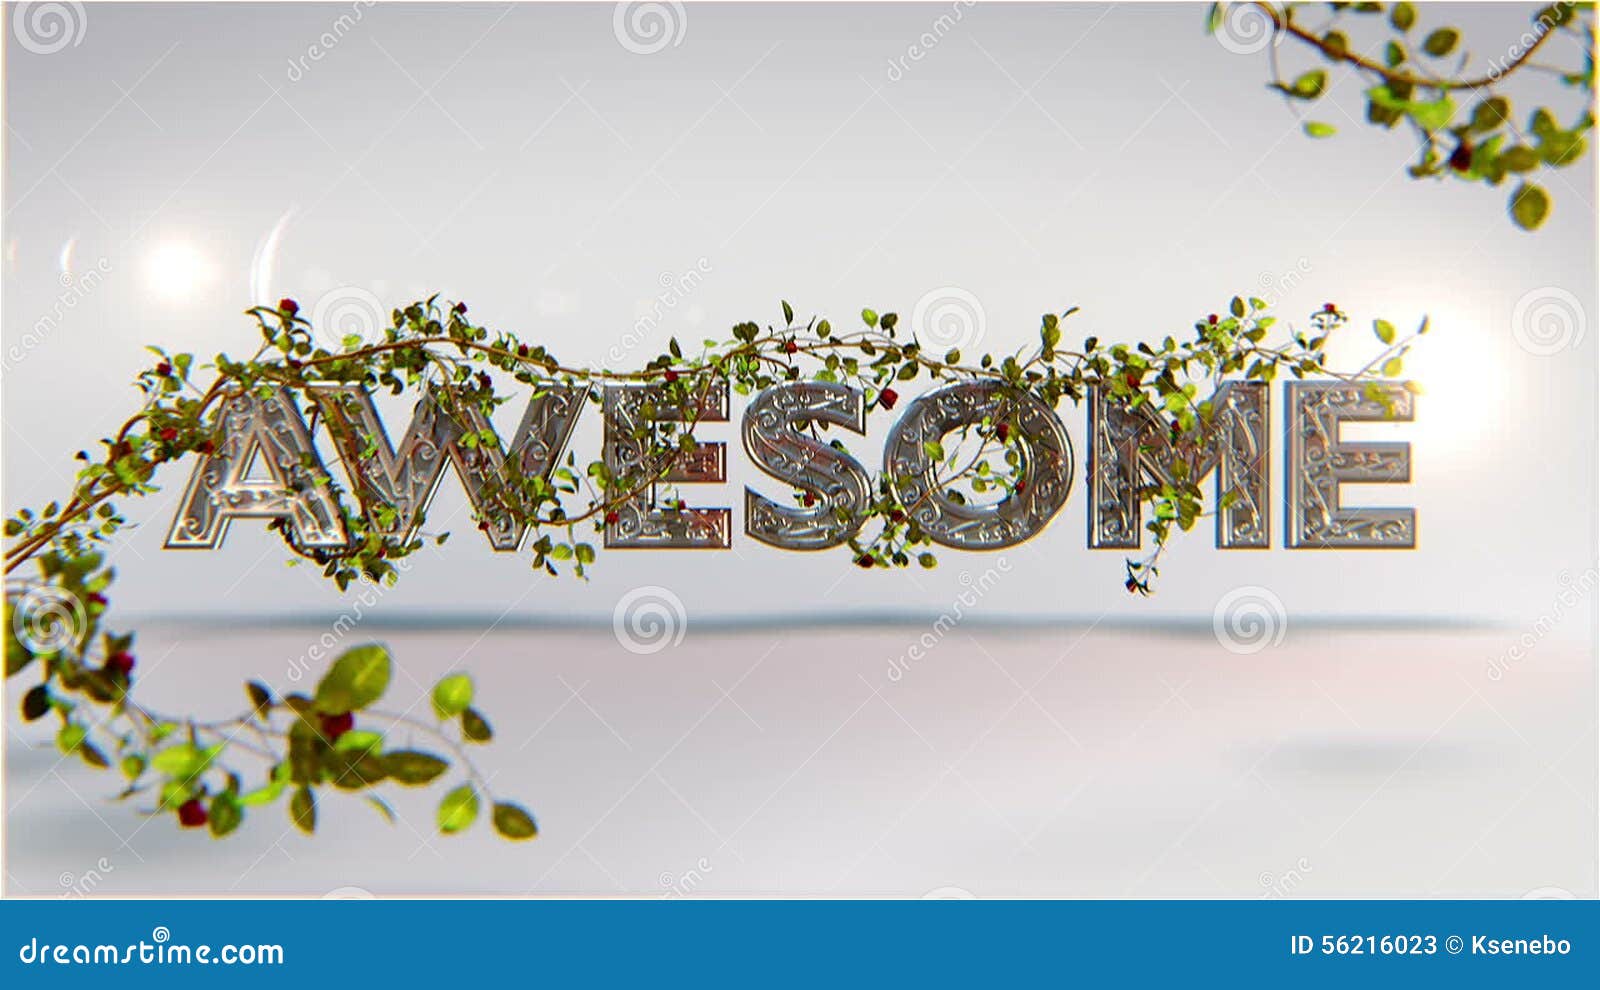 Graphic Text Animation Awesome Stock Video - Video of montage, bright:  56216023